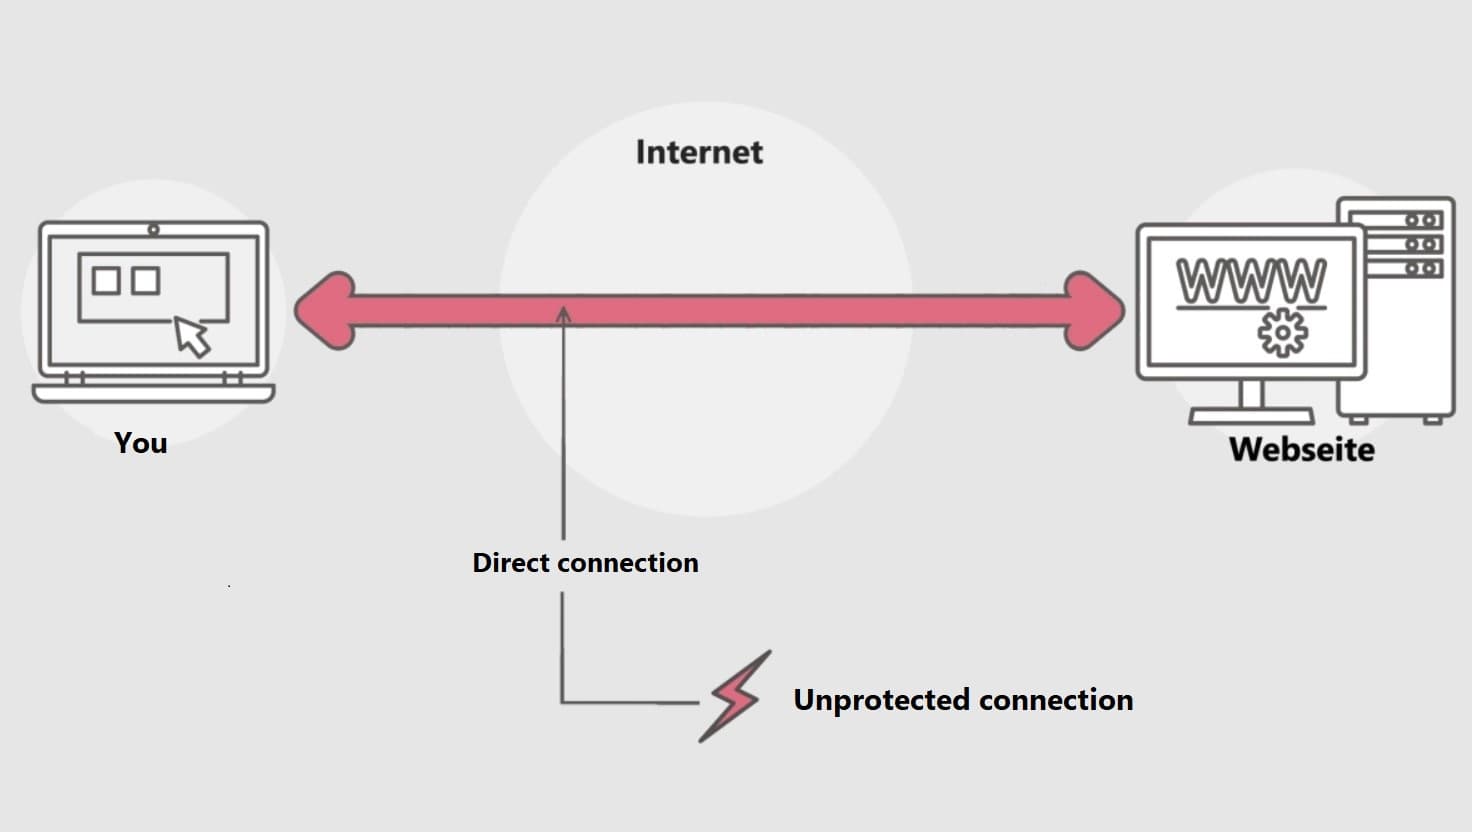 Normal internet connection